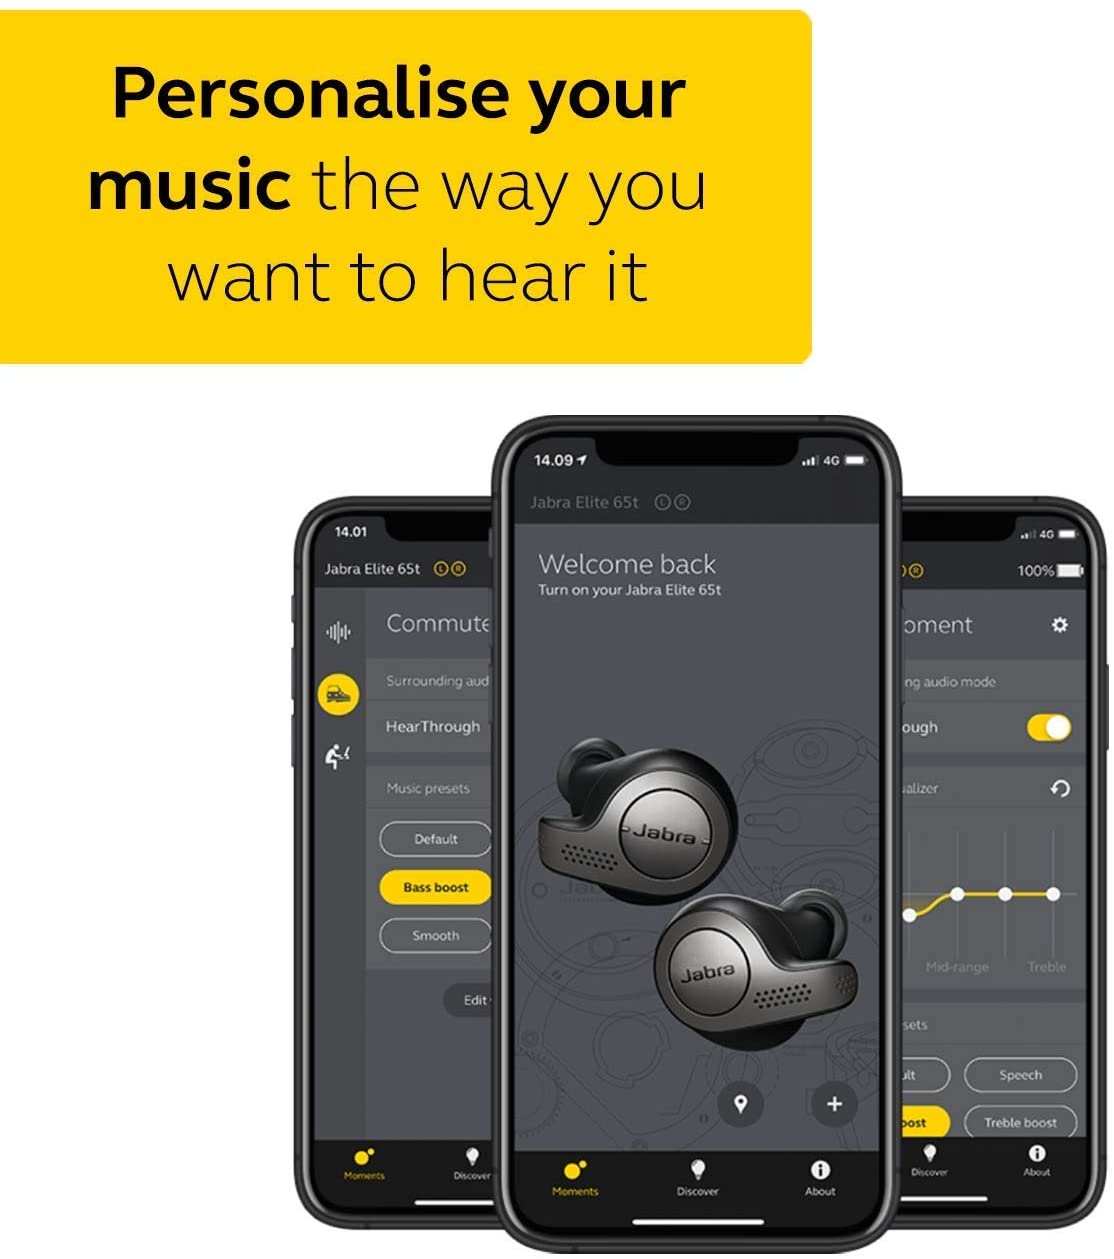 Jabra Elite 65t Earbuds – Passive Noise Isolating Bluetooth Earphones with Four-Microphone Technology for True Wireless Calls and Music – Titanium Black